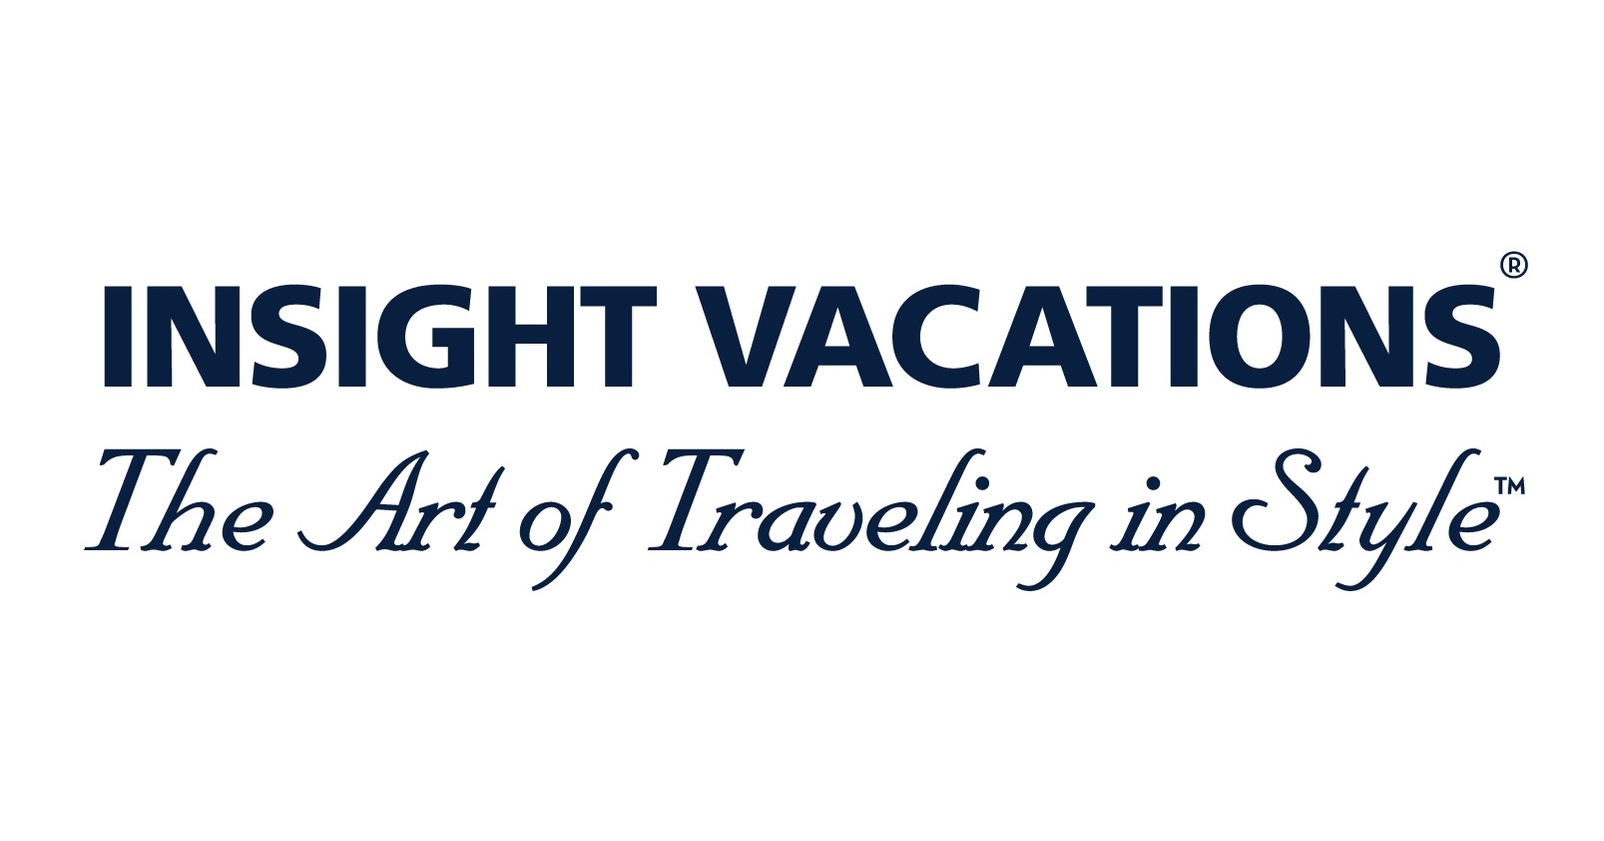 Insight Vacations coupon codes, promo codes and deals